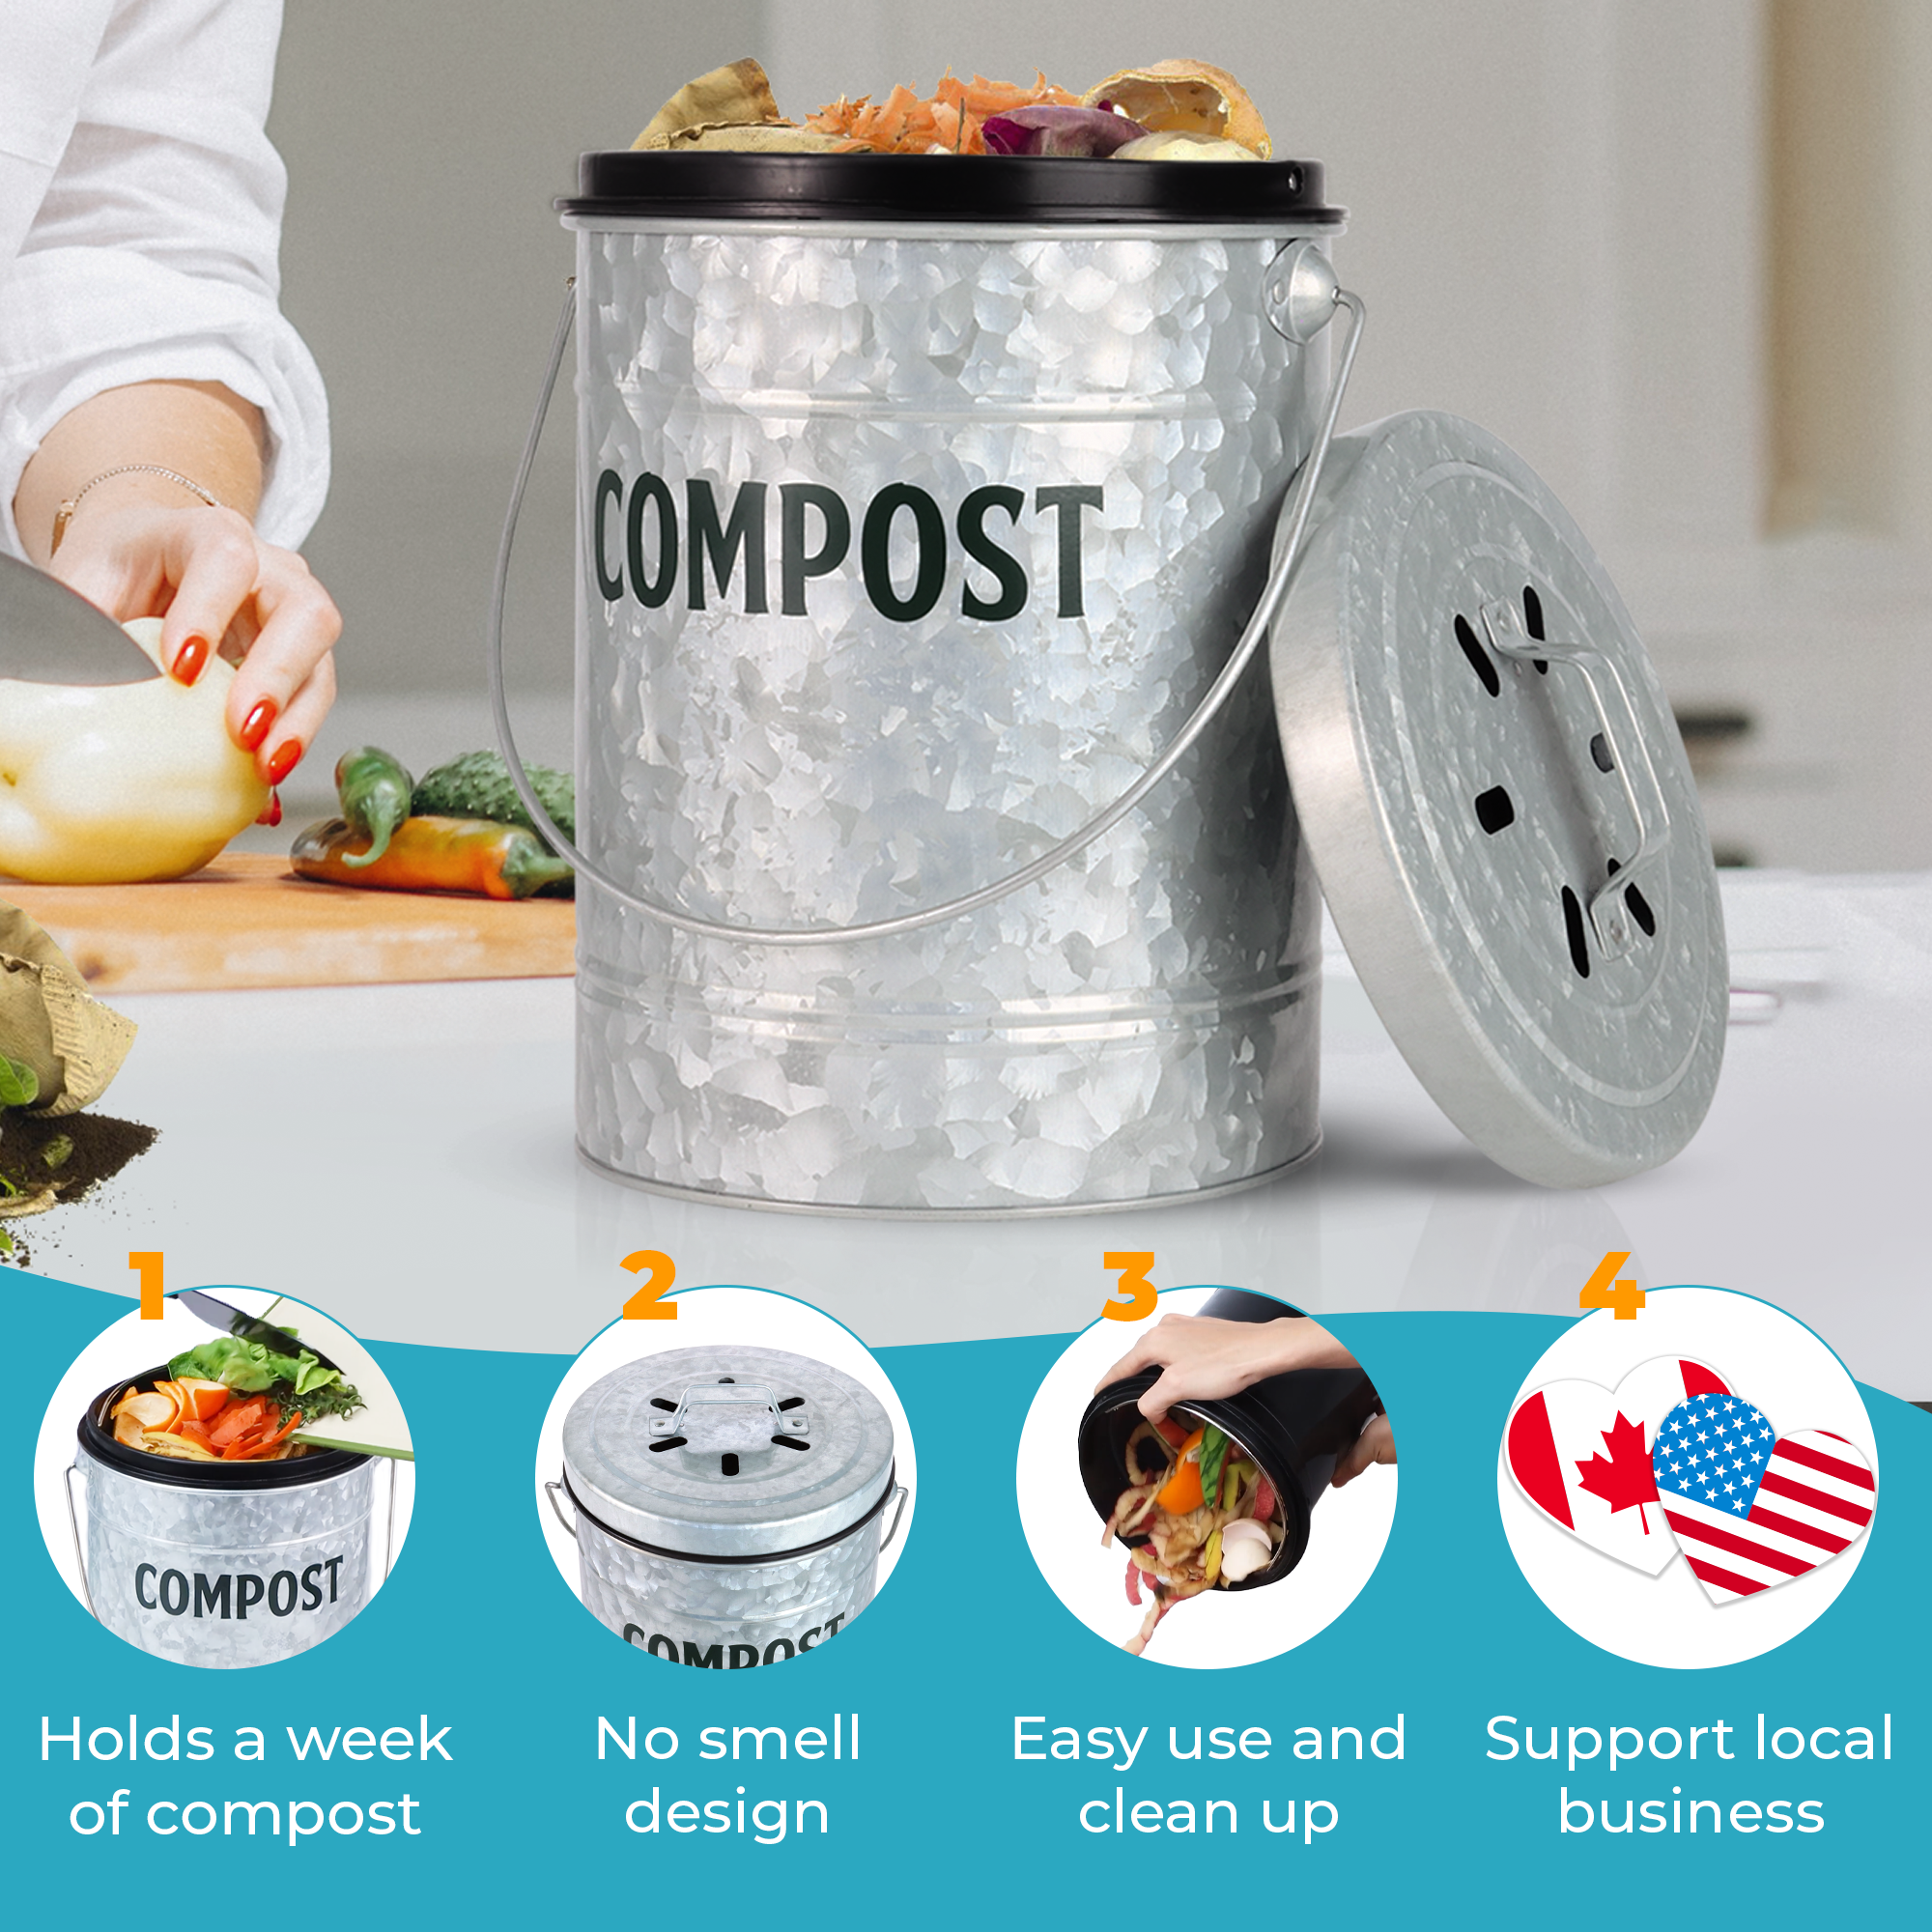 Galvanized Compost Bin by Saratoga Home with x3 filters